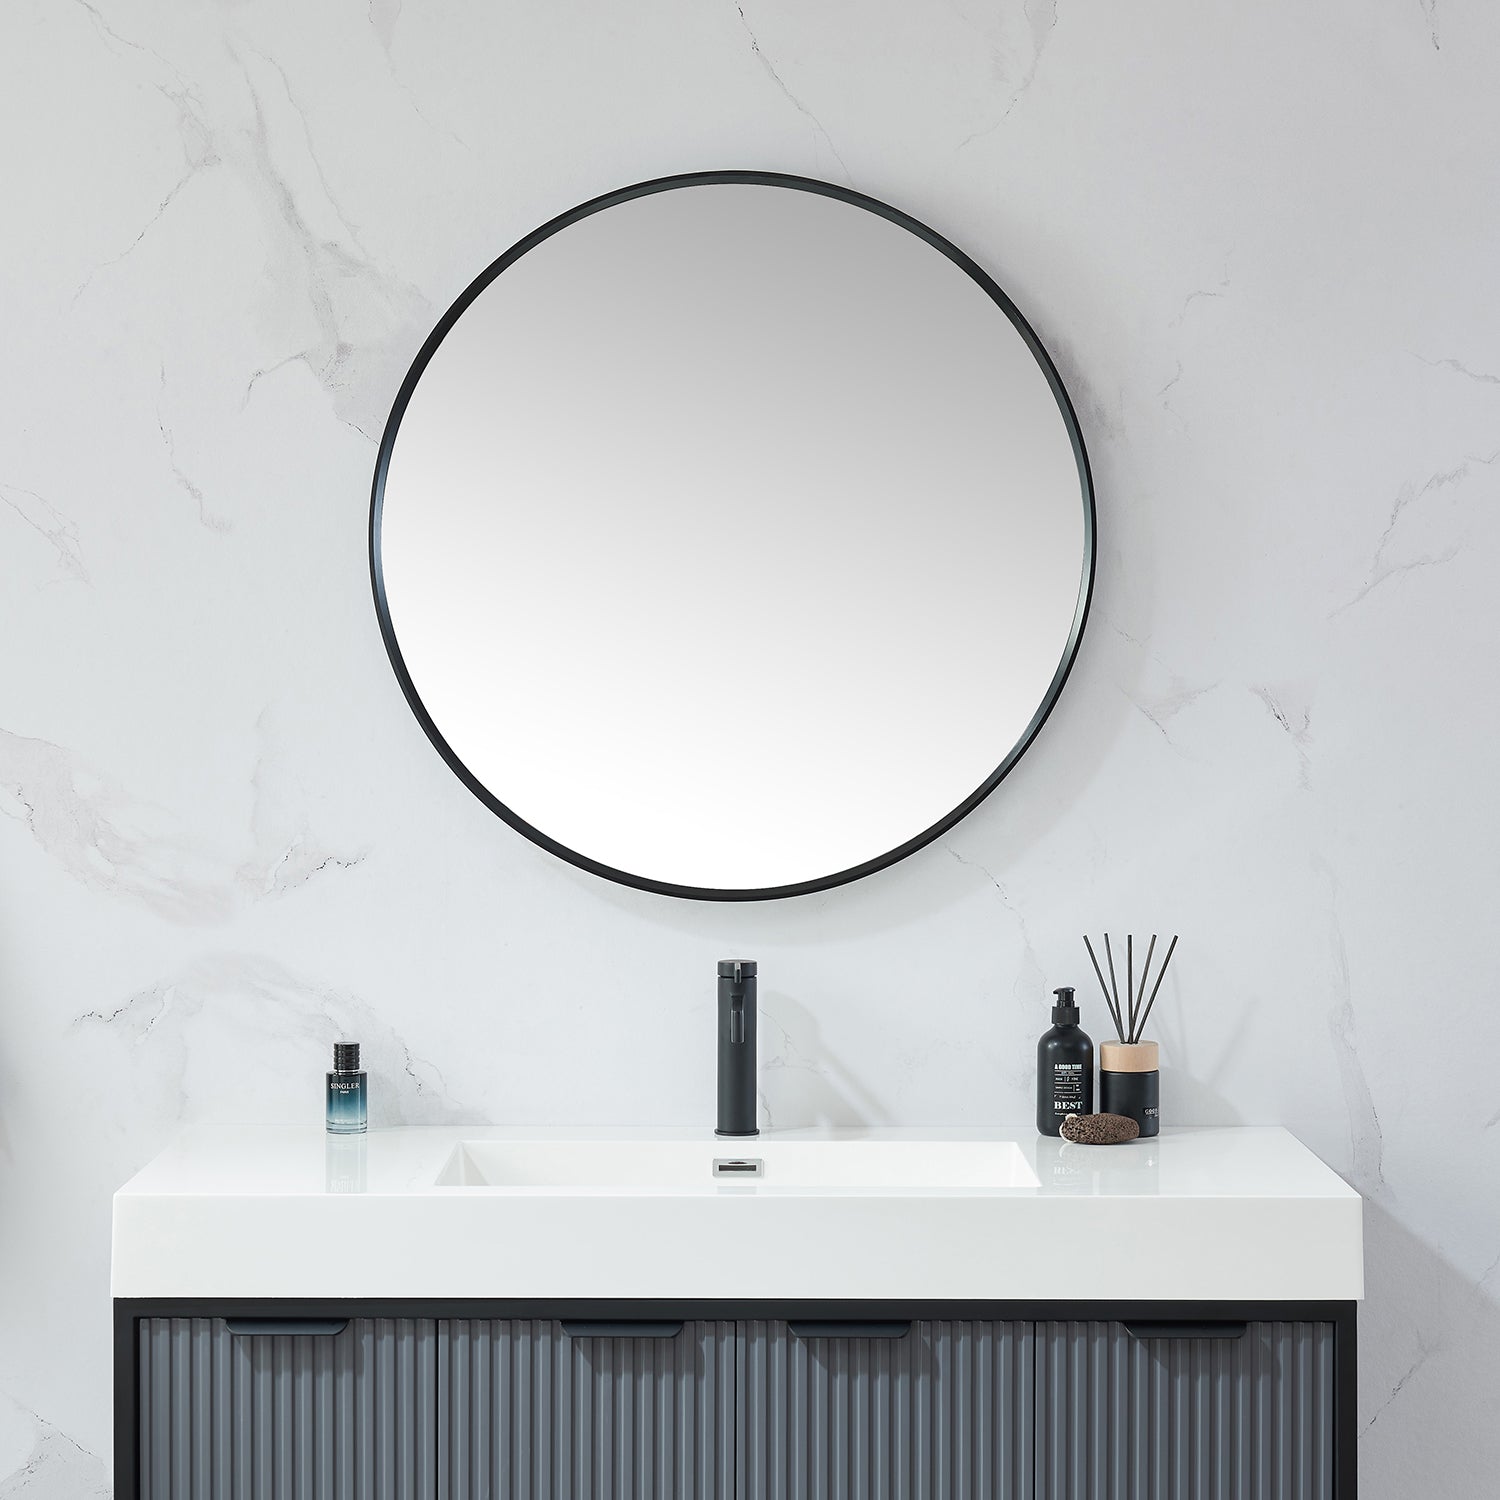 Cascante 32 in. W x 32 in. H Round Metal Wall Mirror in Brushed Black